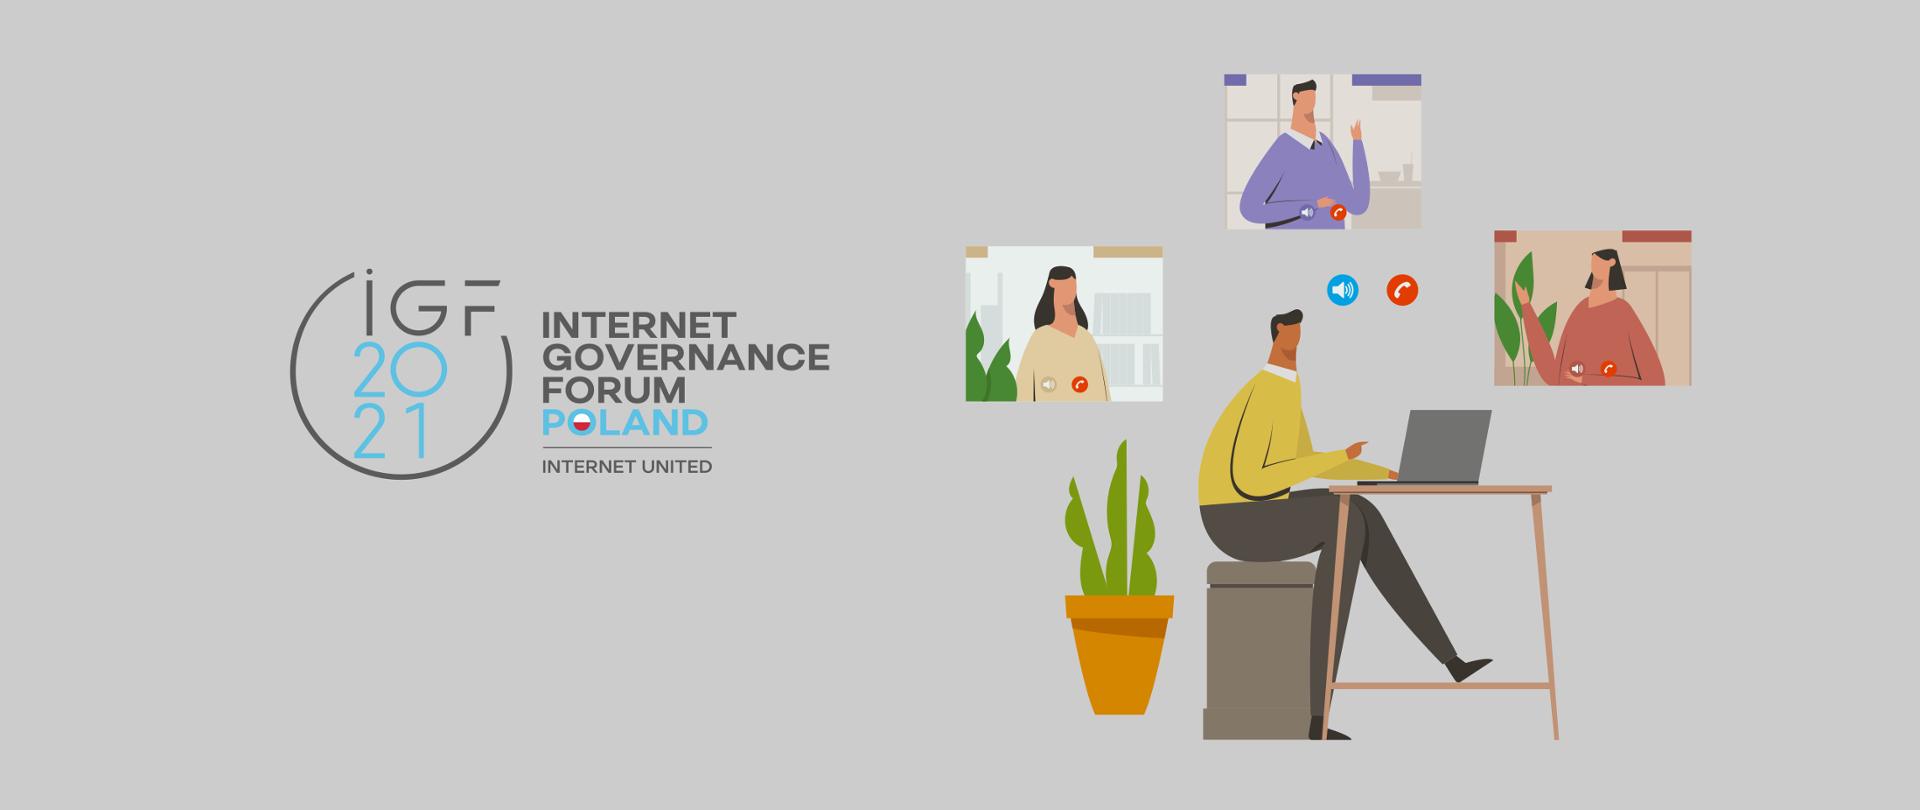 Vector graphic on gray background. On the right - four people in a video chat. On the left - IGF 2021 logo and text IGF 2021 Internet Governance Forum Poland, Internet United. 